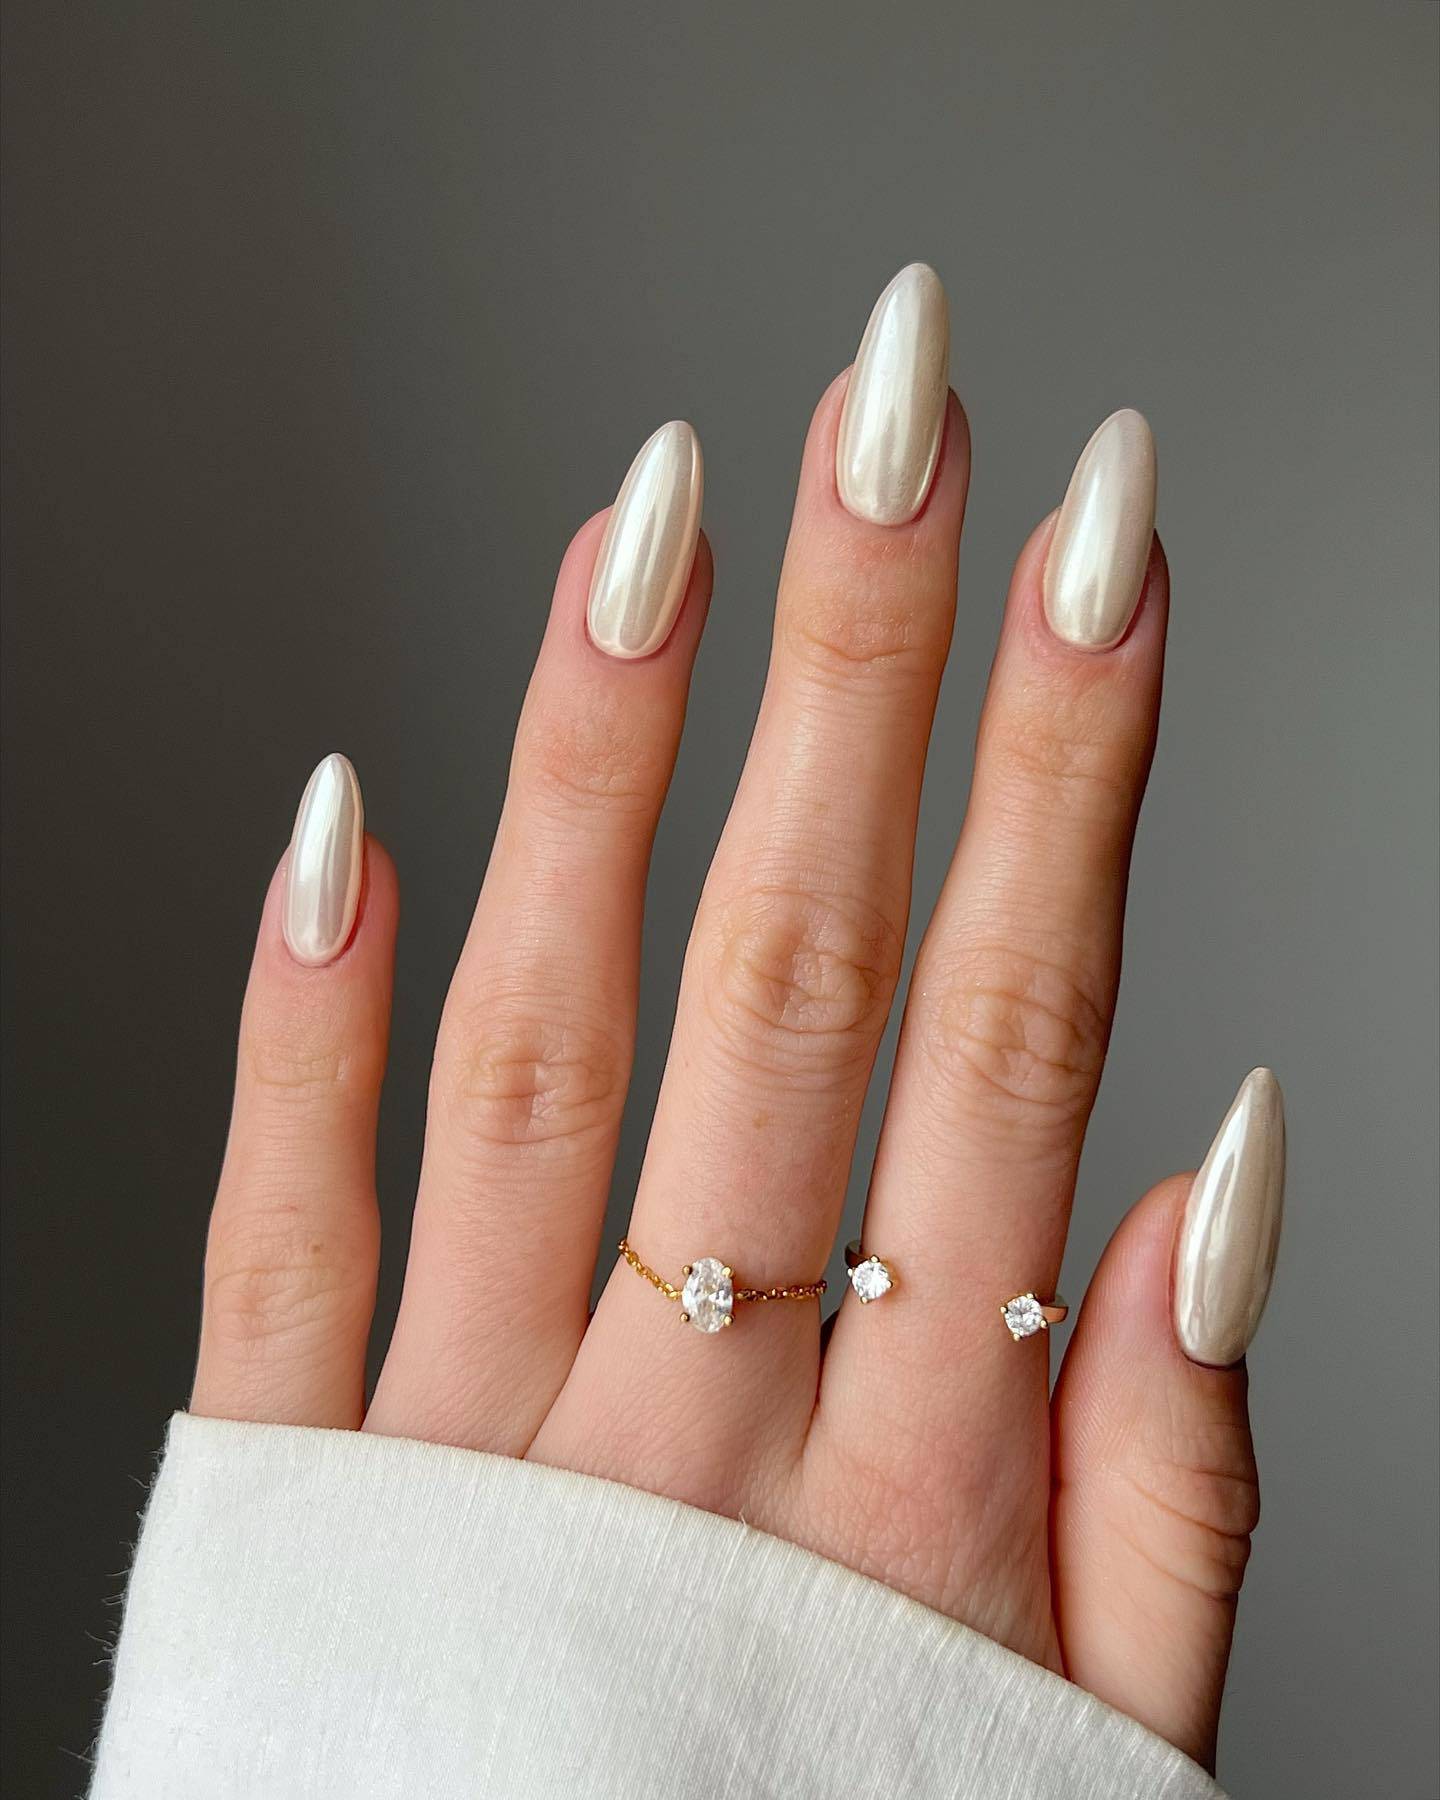 30 Chic Chrome Nail Designs For The Ultimate Glam Look - 235